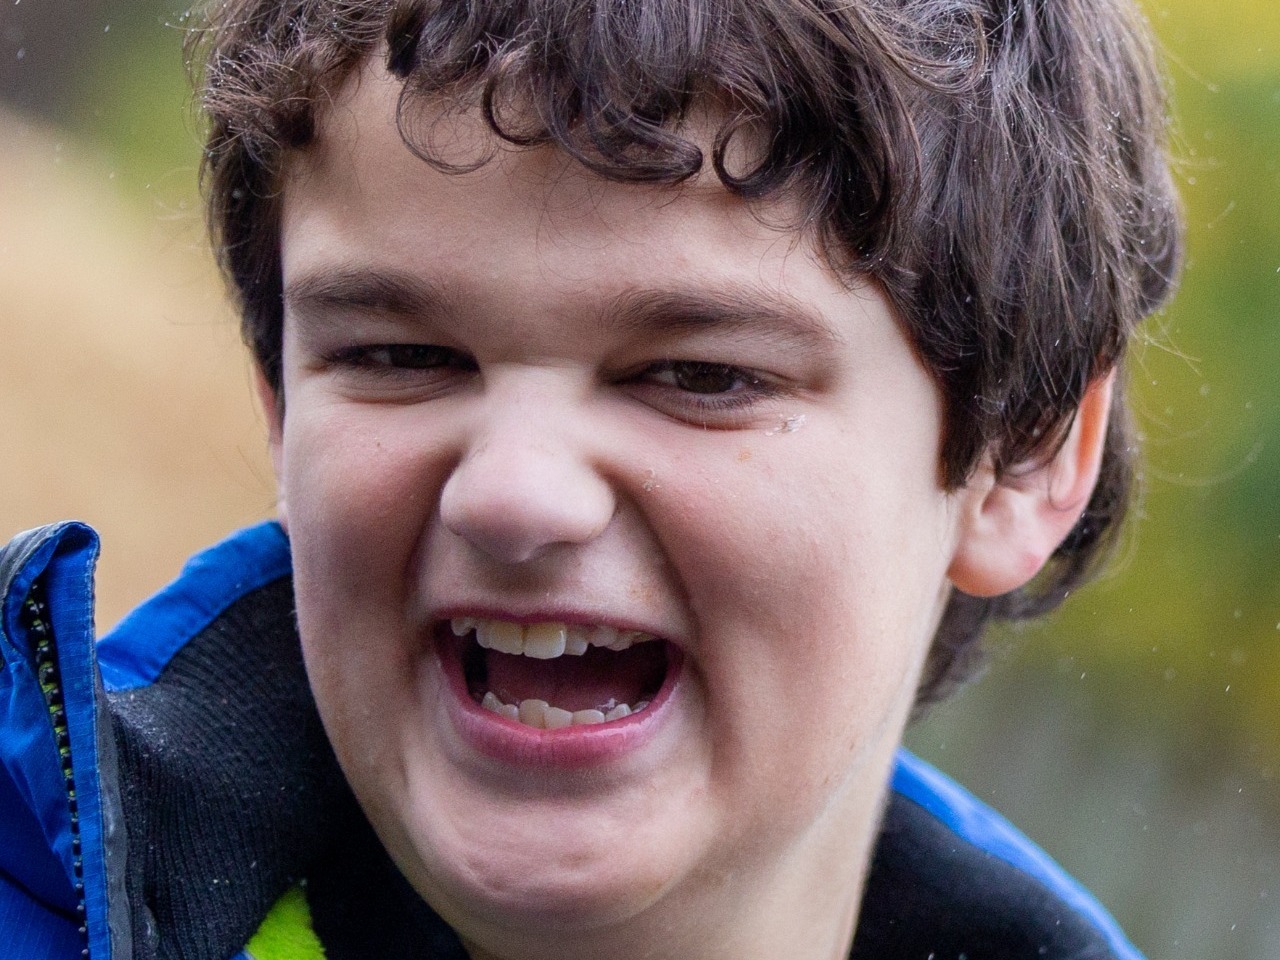 This happy young man with learning difficulties is enjoying his outdoor school photography session